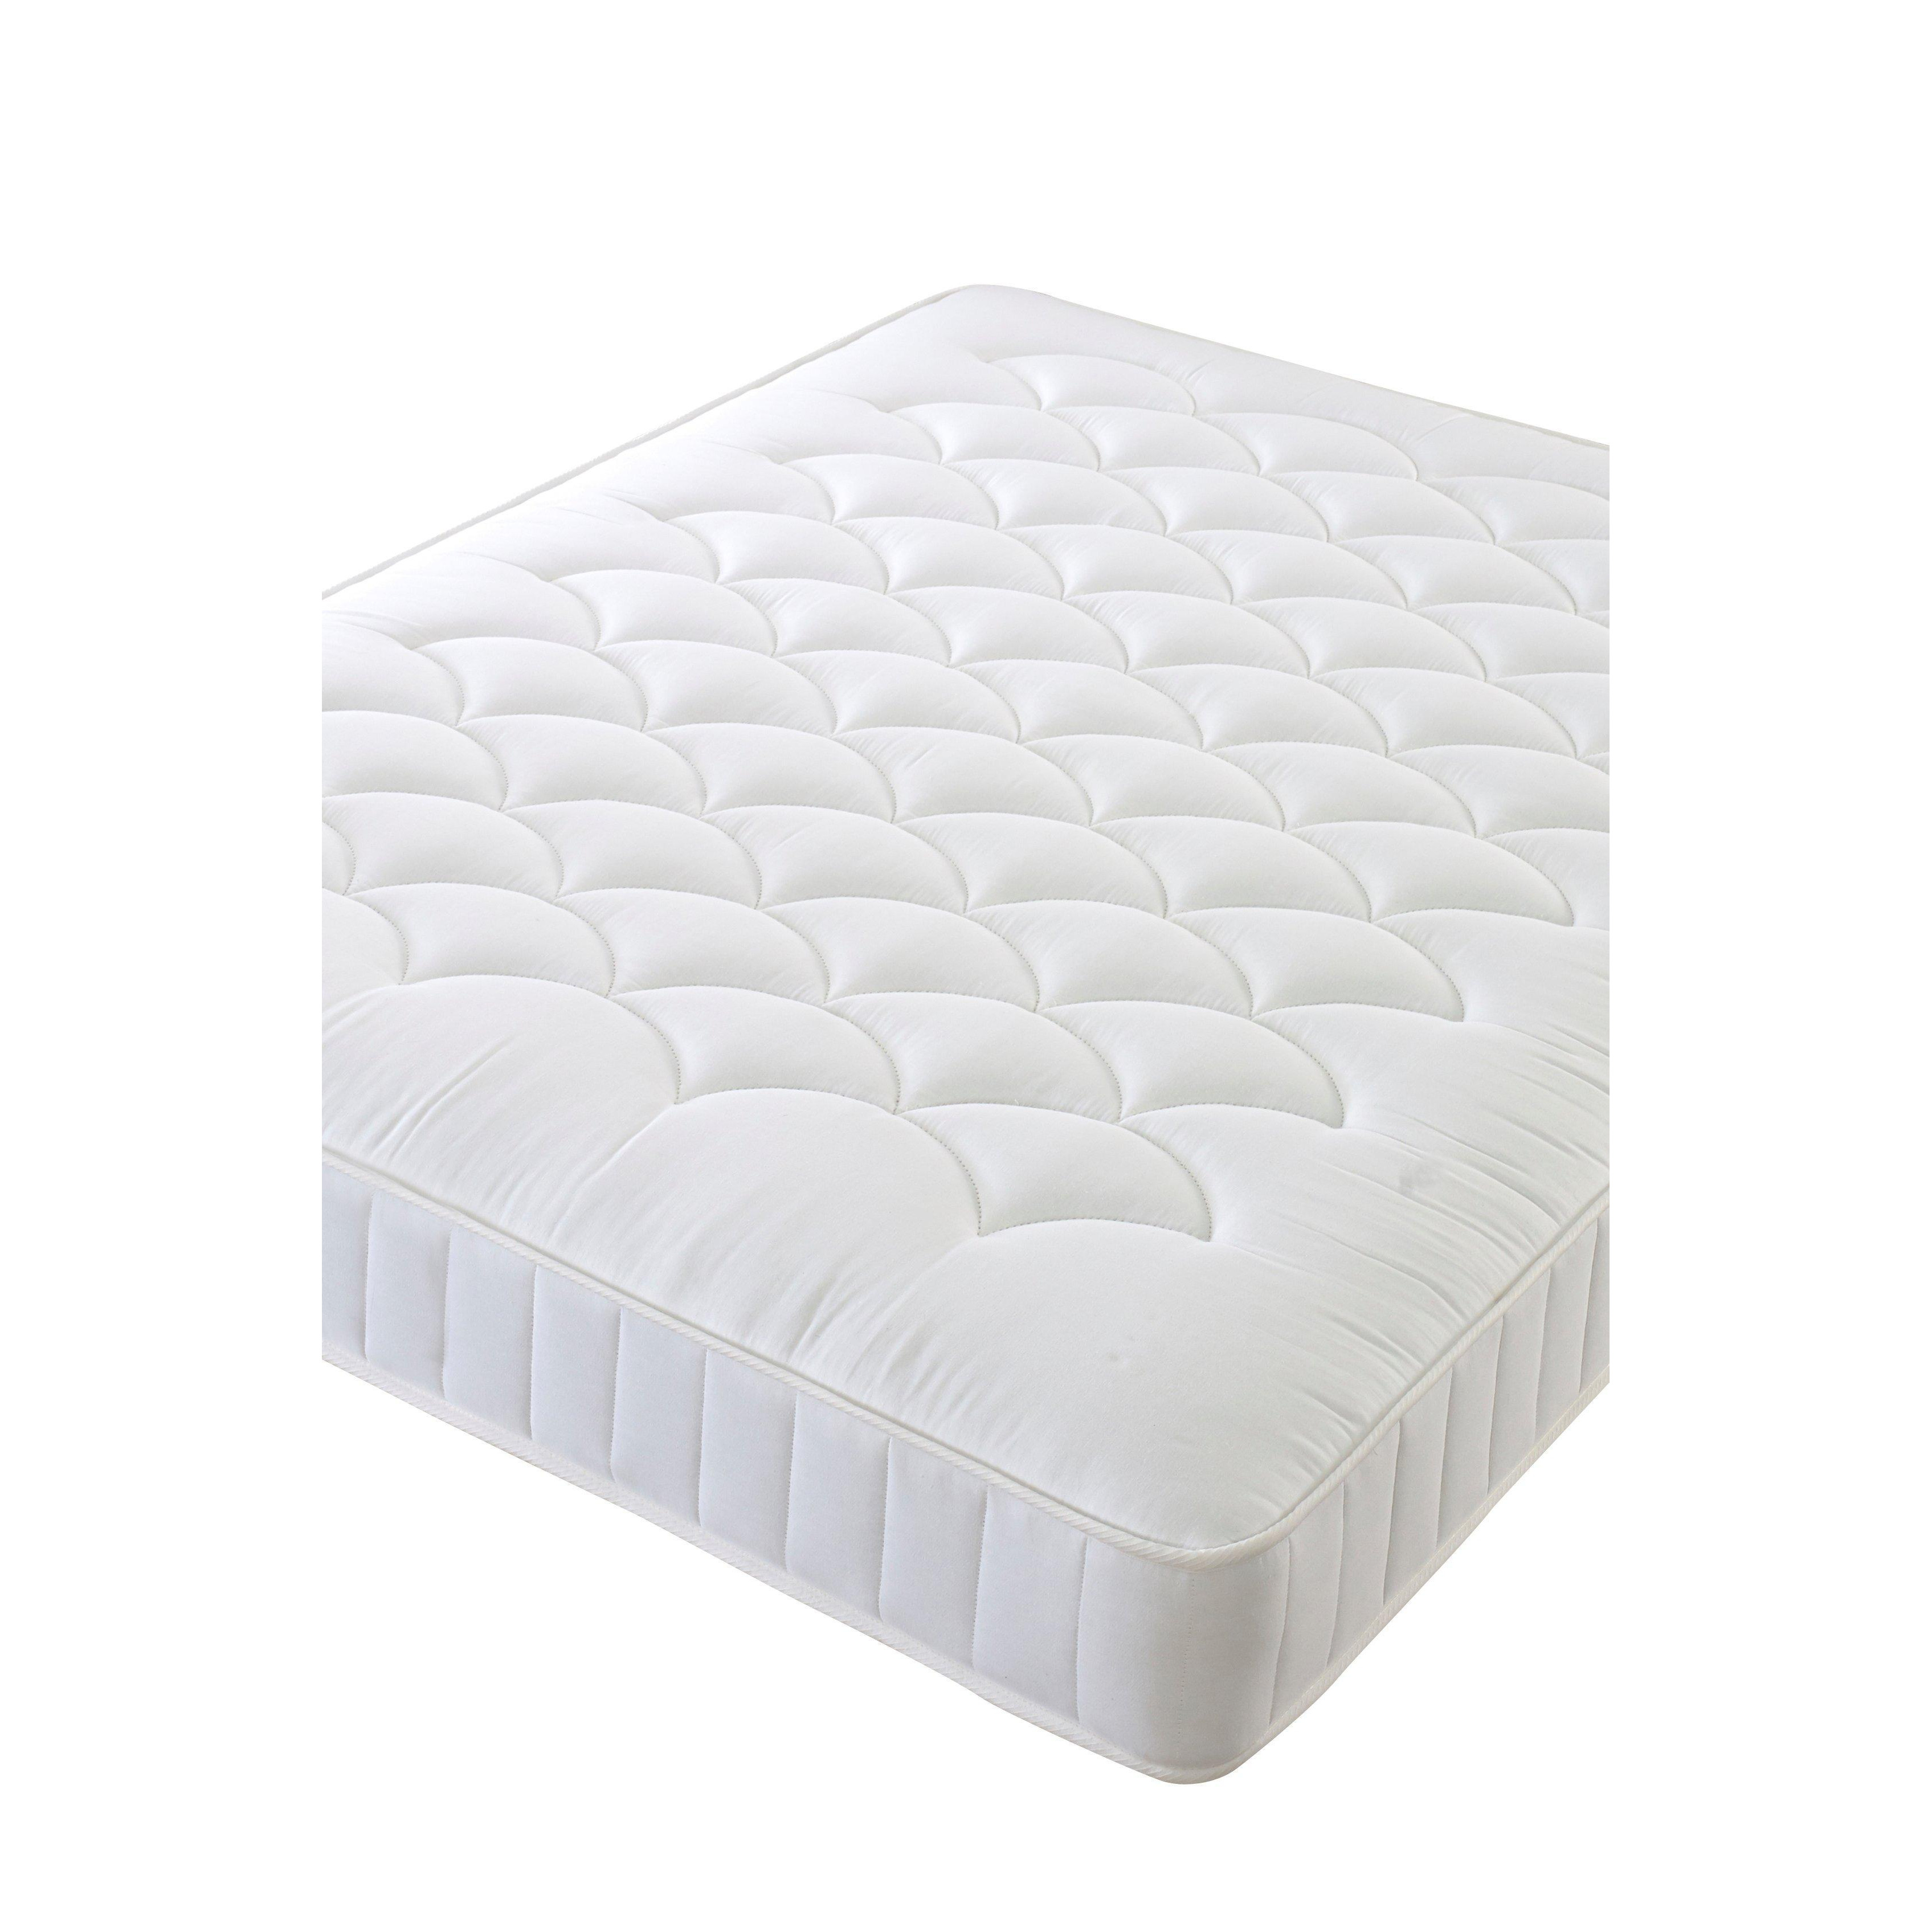 White Classic Cotton Hypoallergenic Quilted Ortho Mattress - image 1